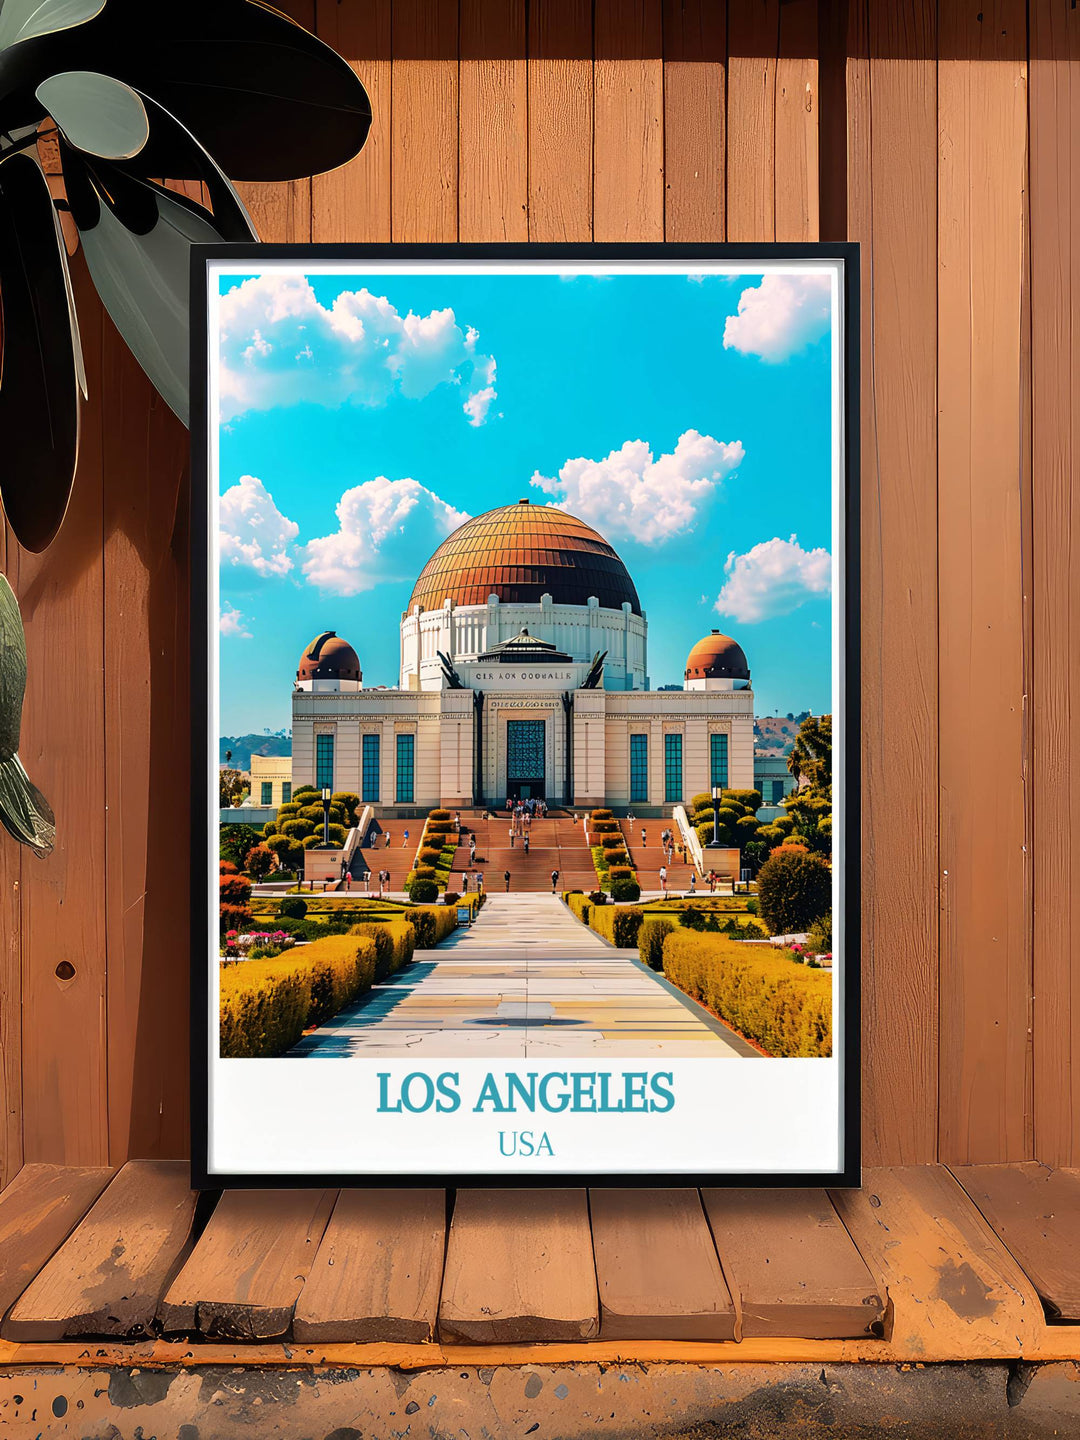 Decorative pieces inspired by the architectural beauty of Griffith Observatory, blending science and art.